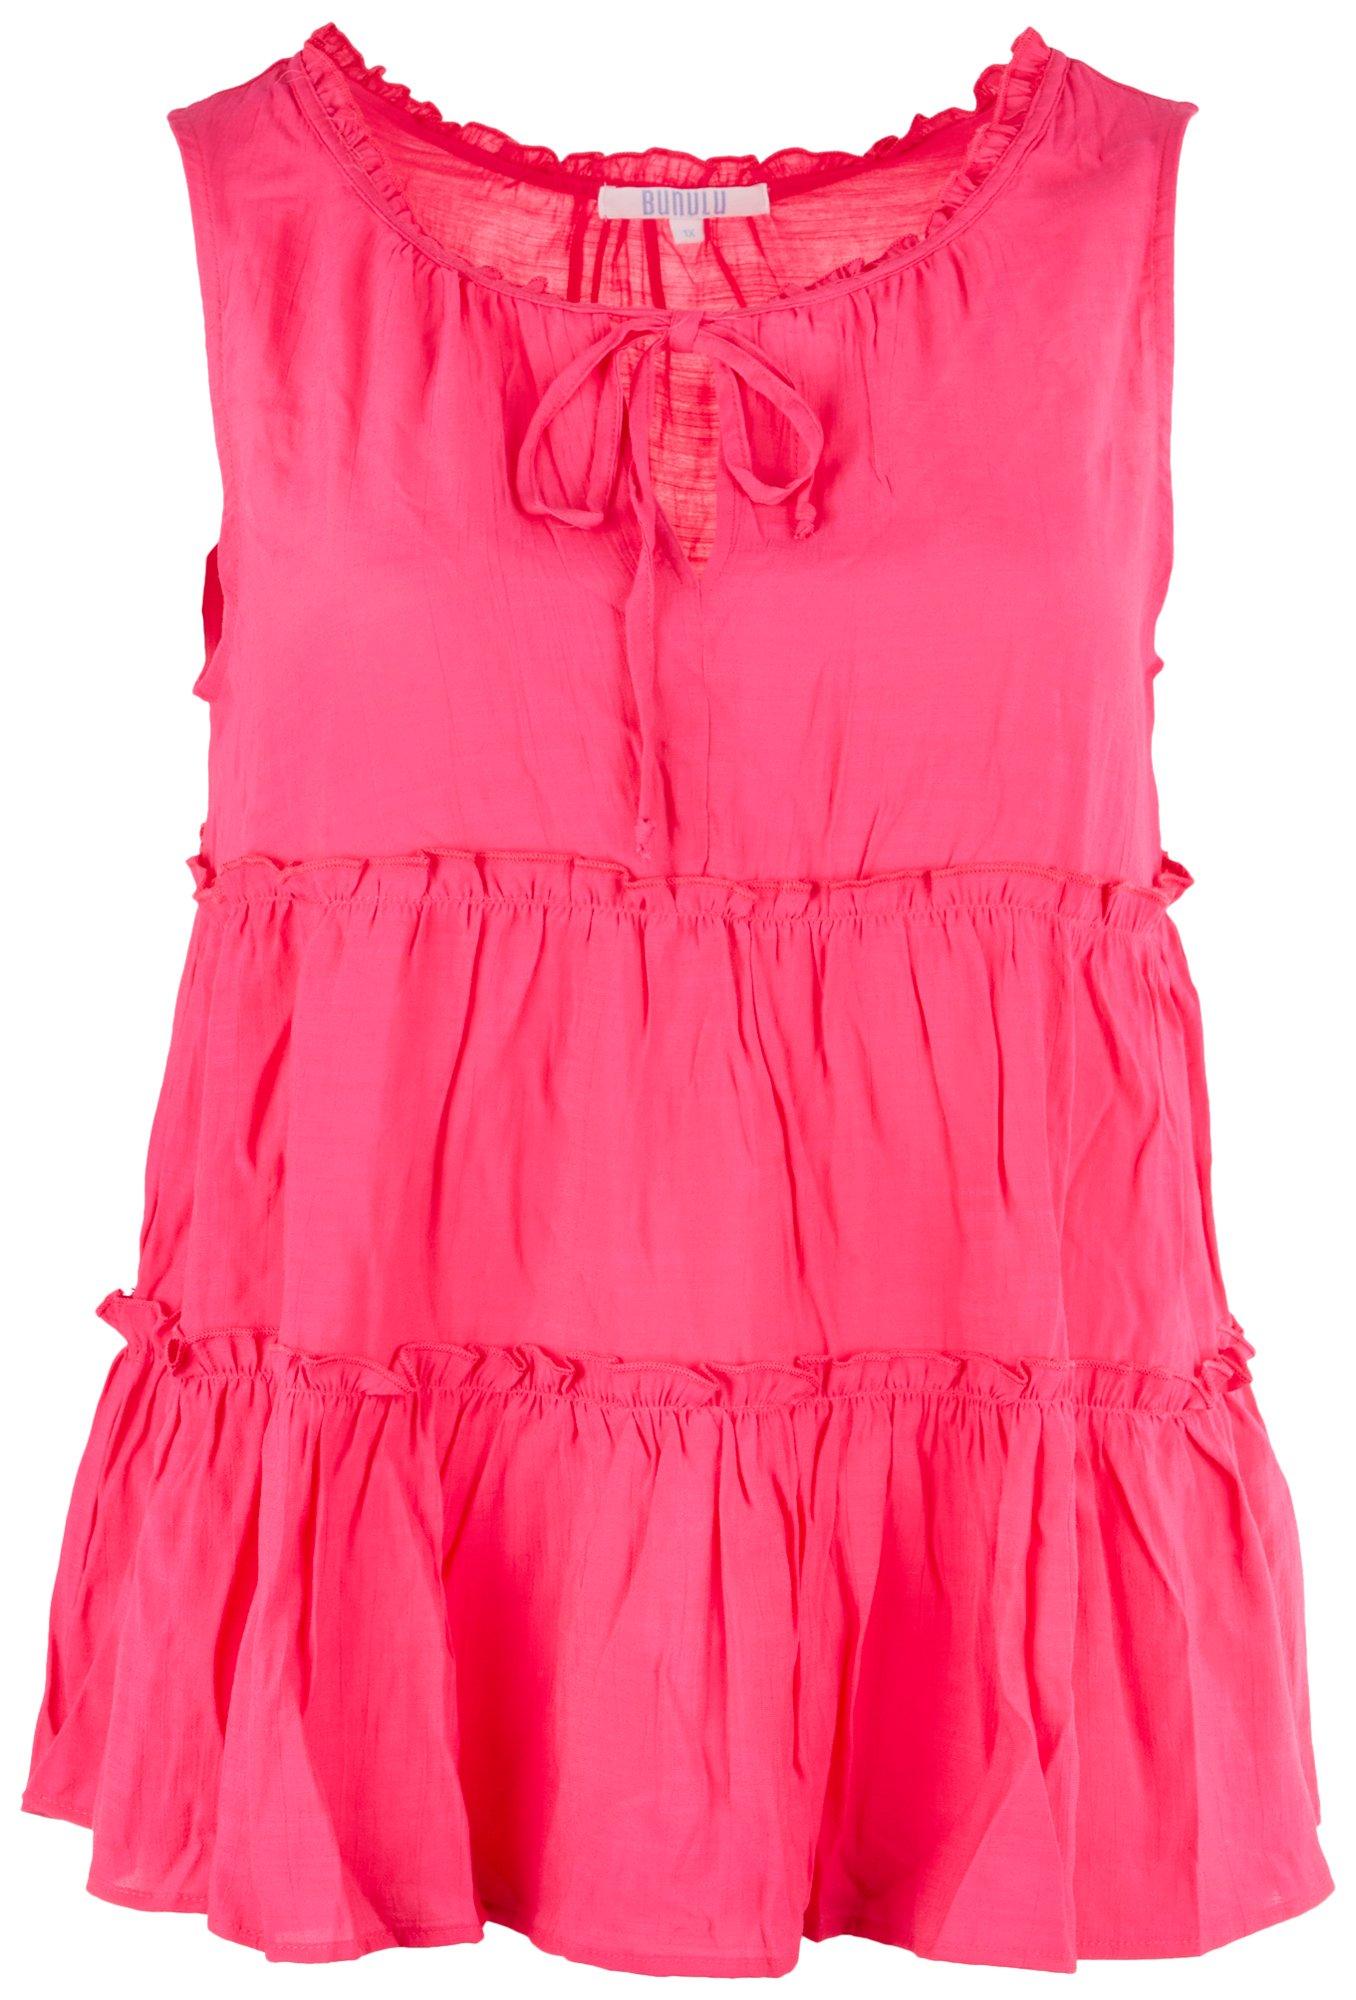 Plus Solid Ruffle Tiered Sleeveless Top